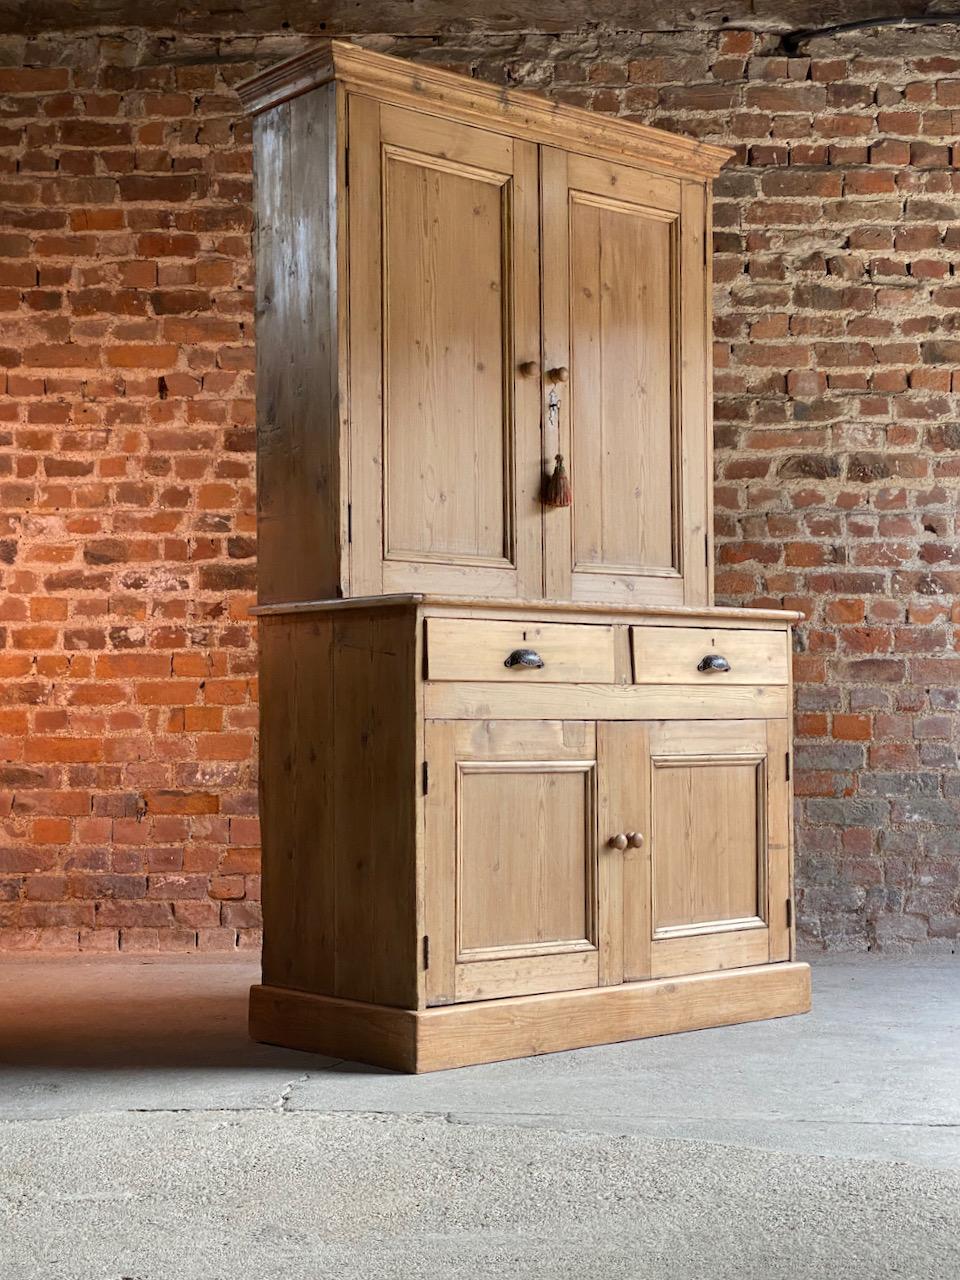 Antique pine housekeepers cupboard 19th Century Victorian. Circa 1890

Fabulous large antique Victorian pine housekeepers cupboard wardrobe 19th century circa 1890, the corniced top above two panelled doors with working lock and key, three shelves